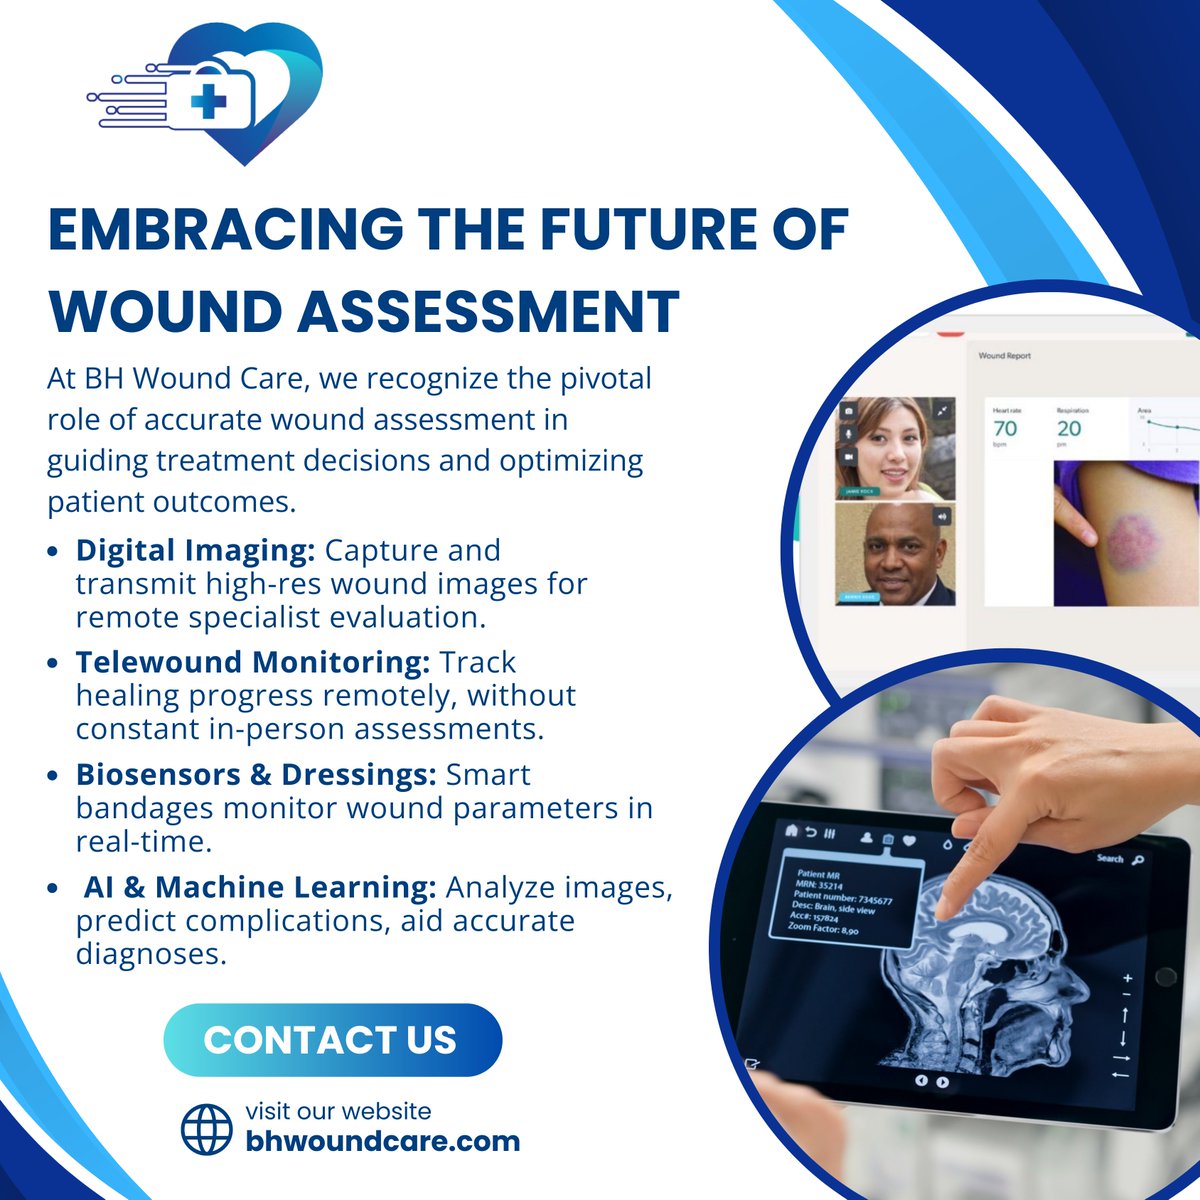 Embrace the future of wound assessment at BH Wound Care! With digital imaging, telewound monitoring, biosensors, and AI, we revolutionize care for enhanced outcomes. Join us as we reshape wound management with cutting-edge technologies. Contact BHWC today!

#WoundAssessment #BHWC